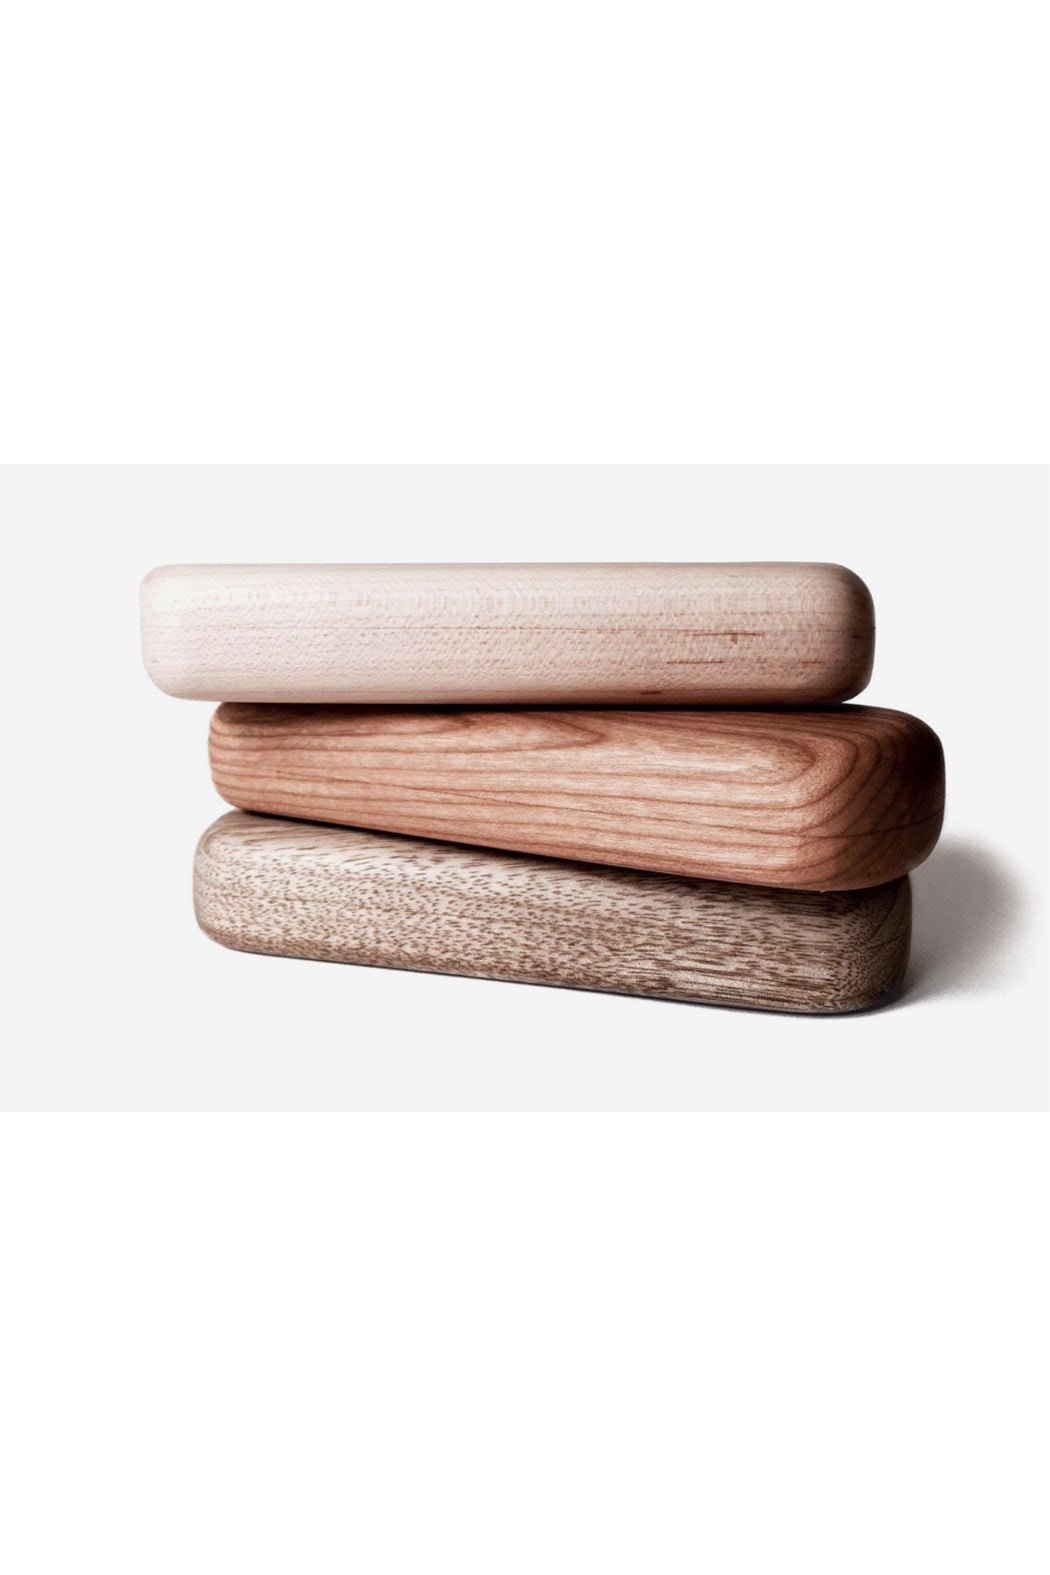 Earnest Efforts Natural Wood Baby Rattle